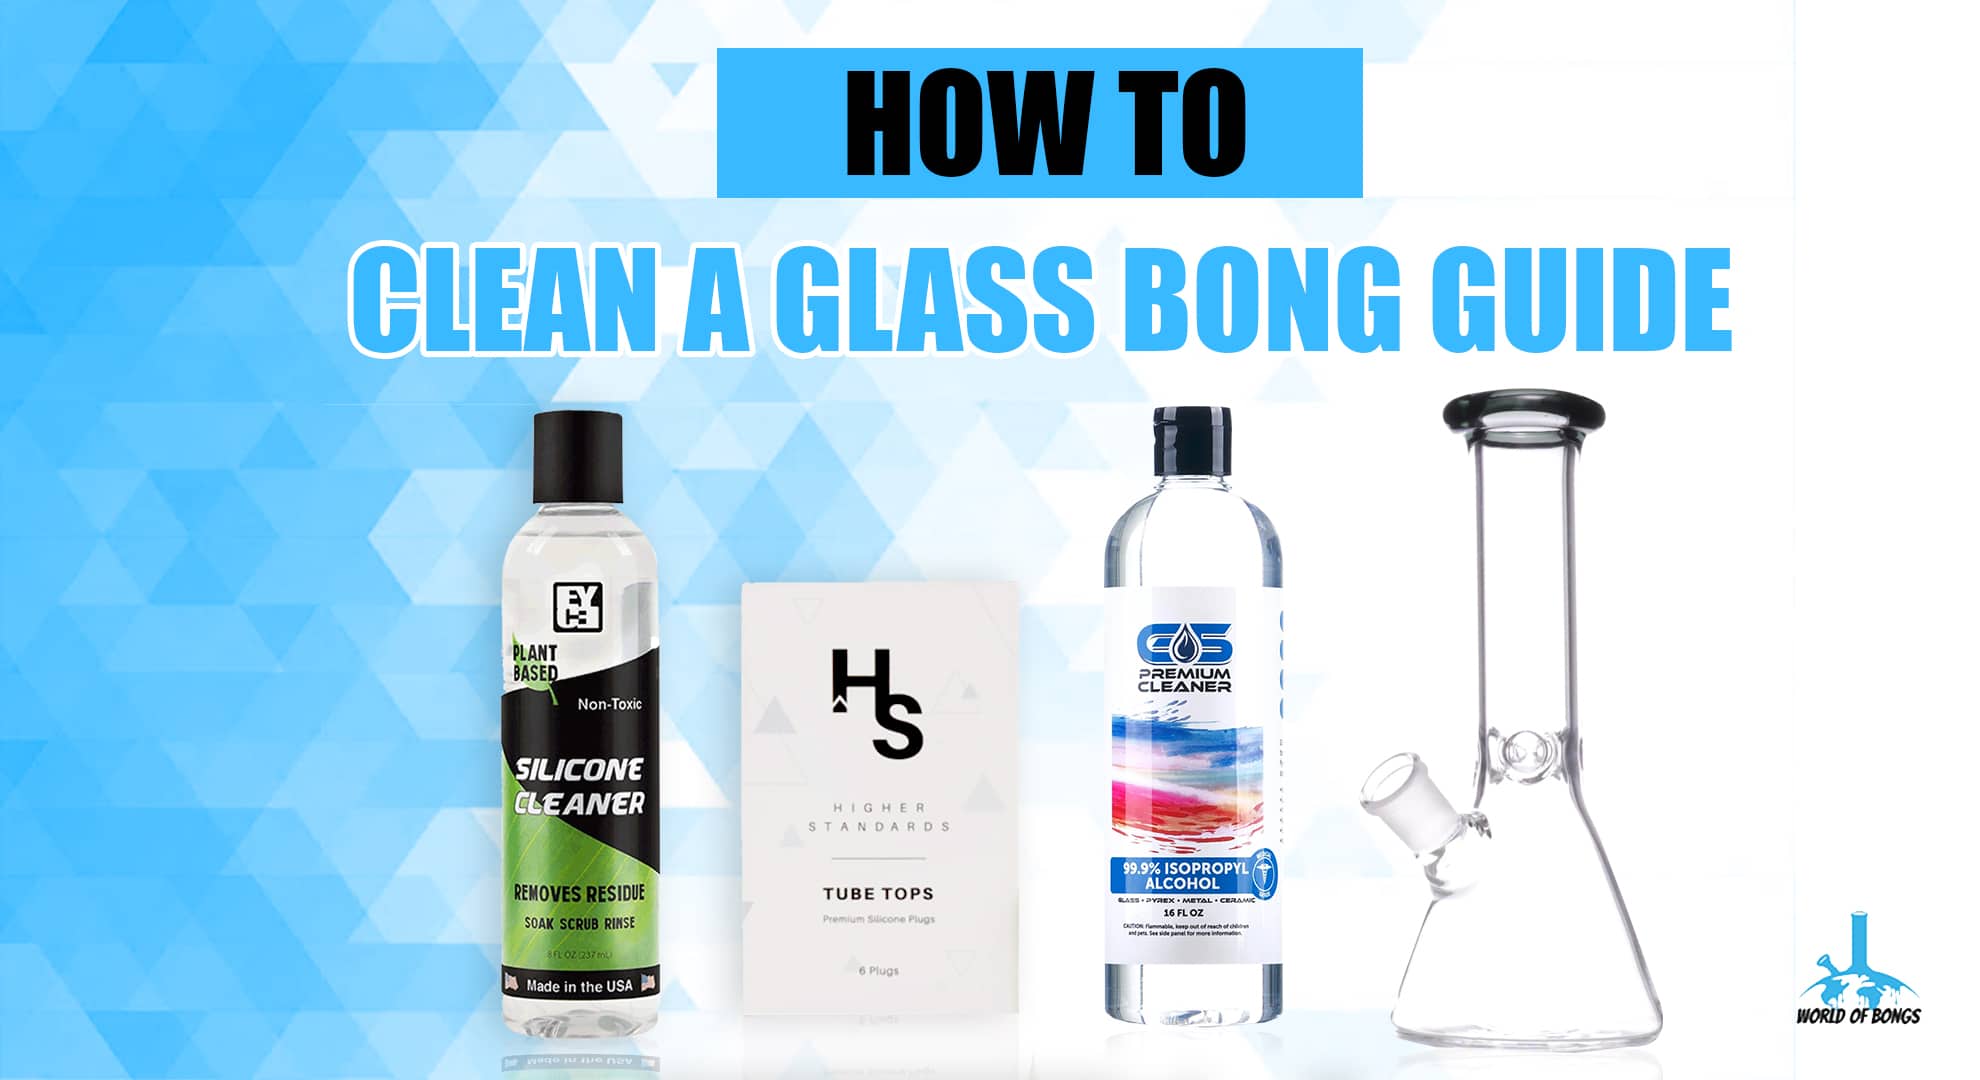 Can I use glass cleaner for bong?